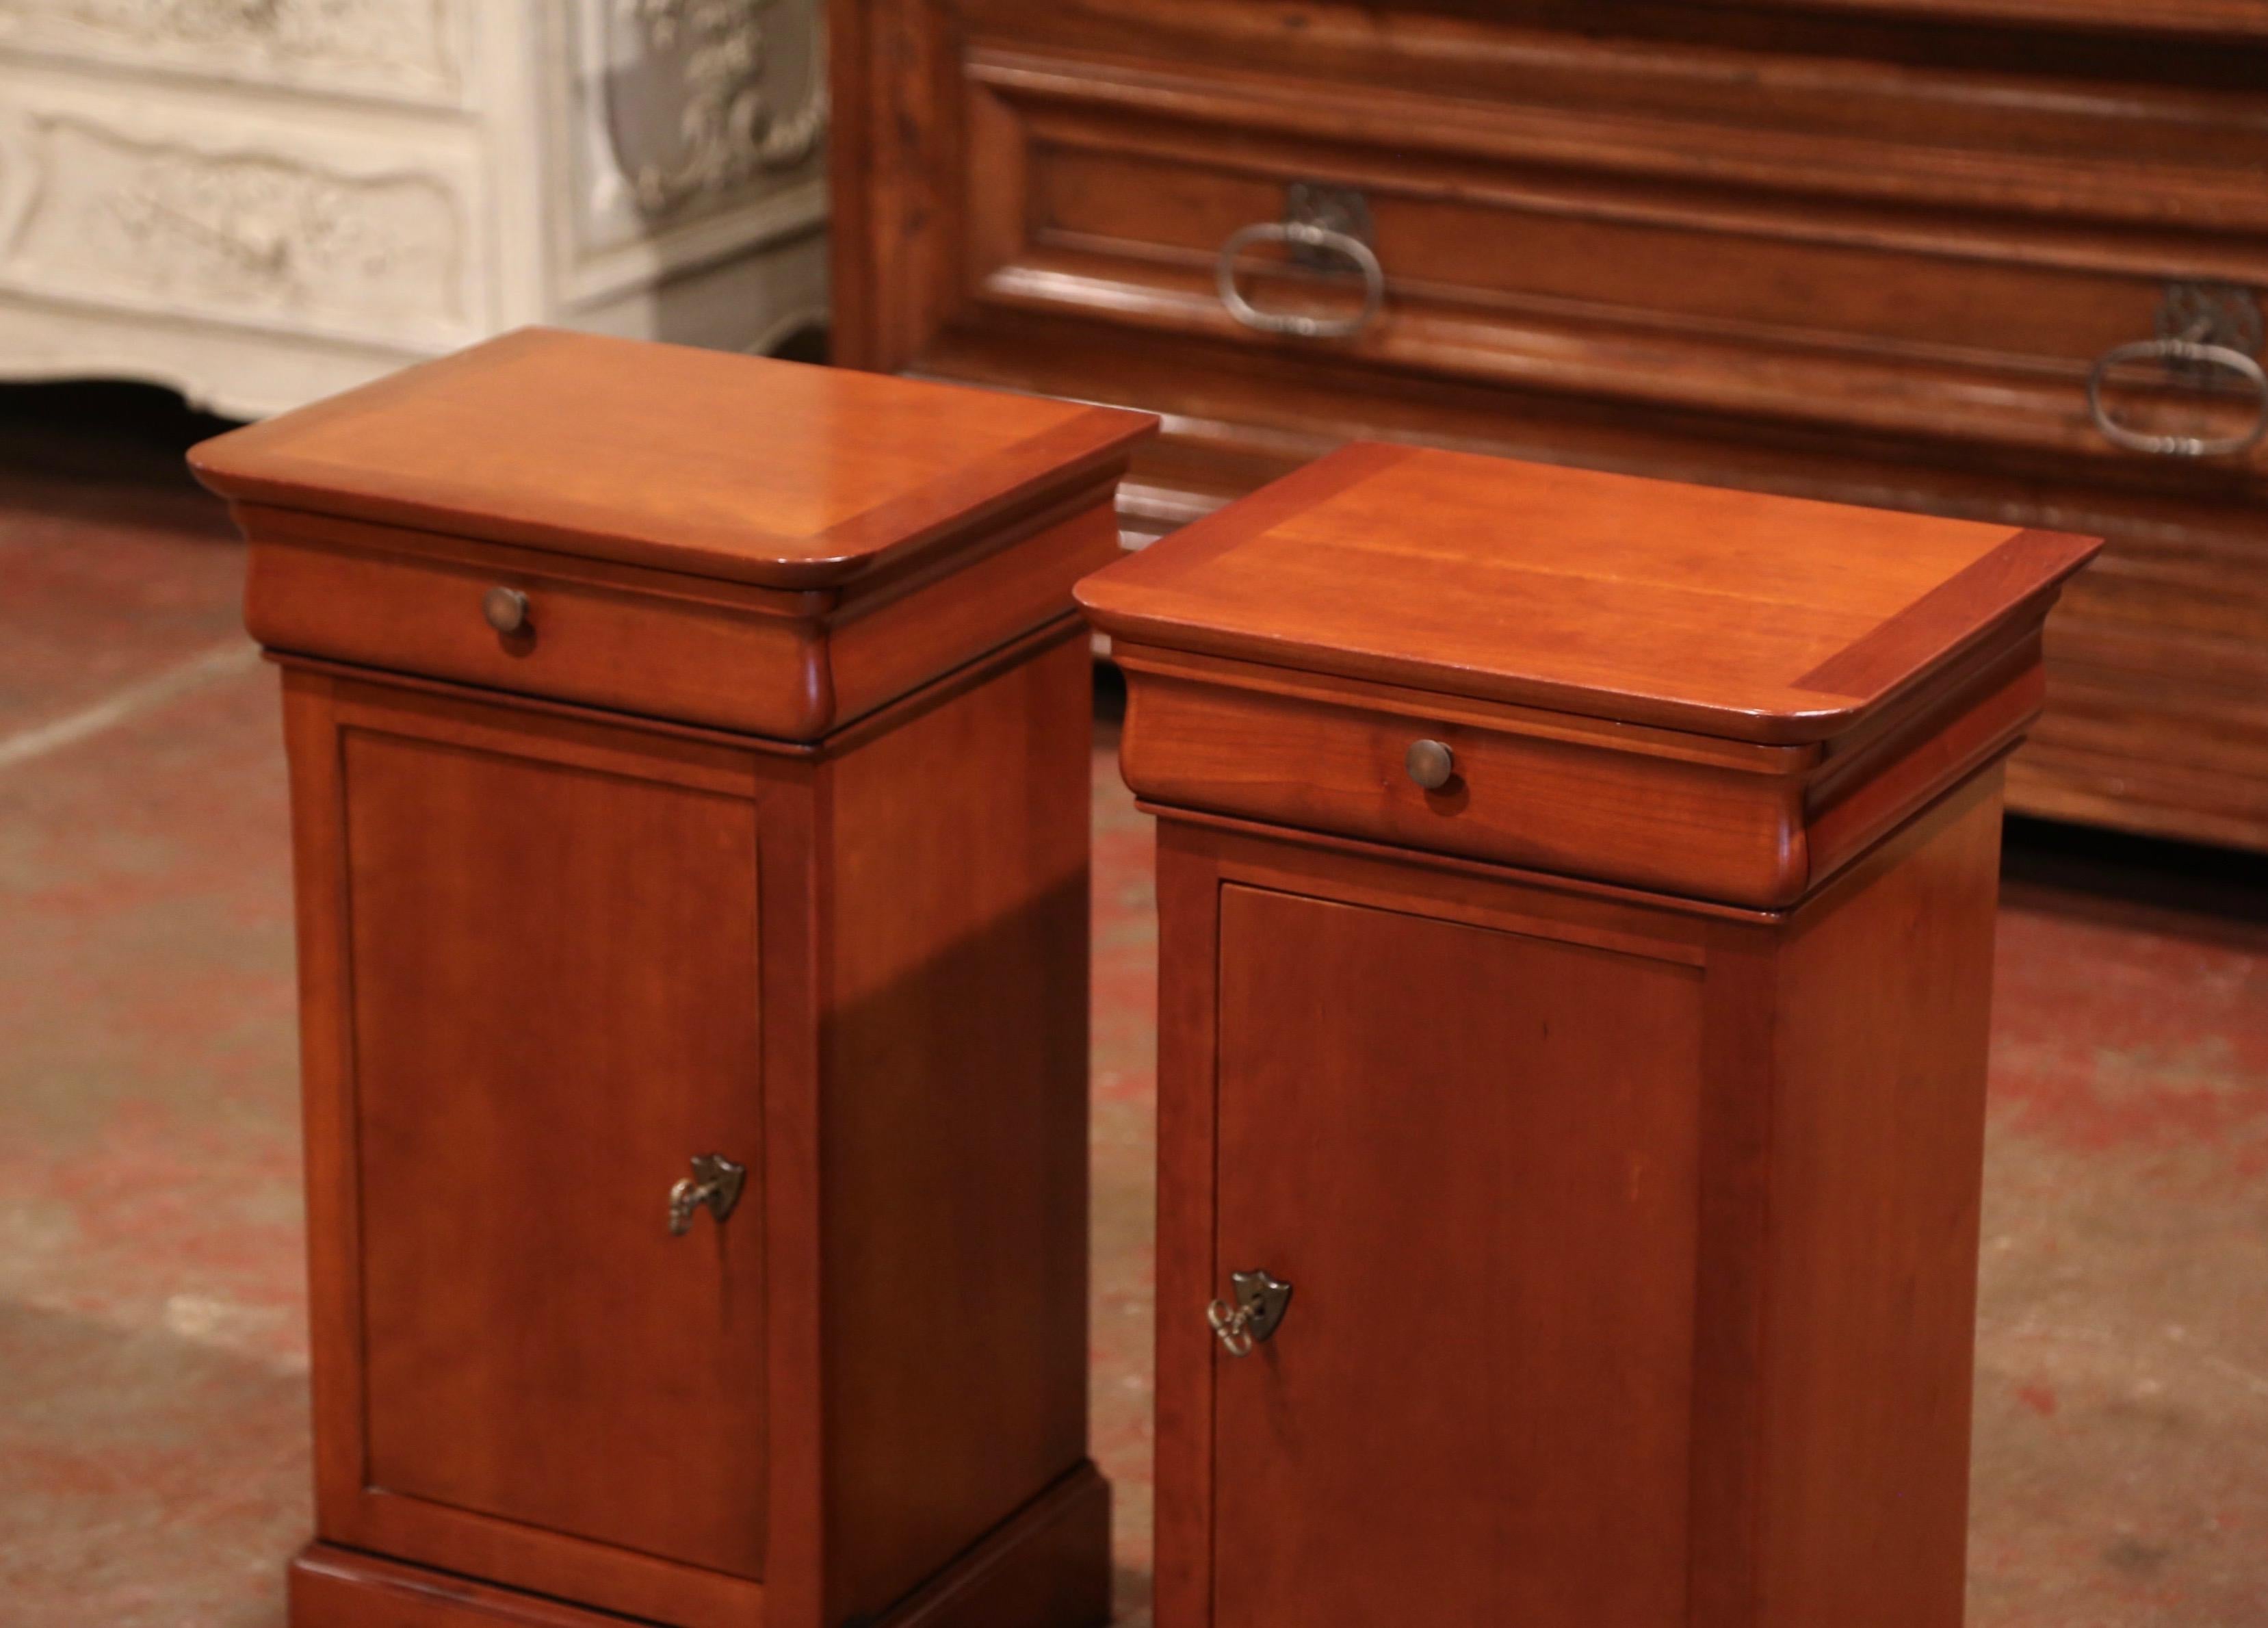 These elegant bedside tables were crafted in France by Grange, circa 1990. Each nightstand features a top drawer embellished with a brass knob, and a long door over a carved bottom plinth. The inside reveals a center shelf for ultimate storage. Both